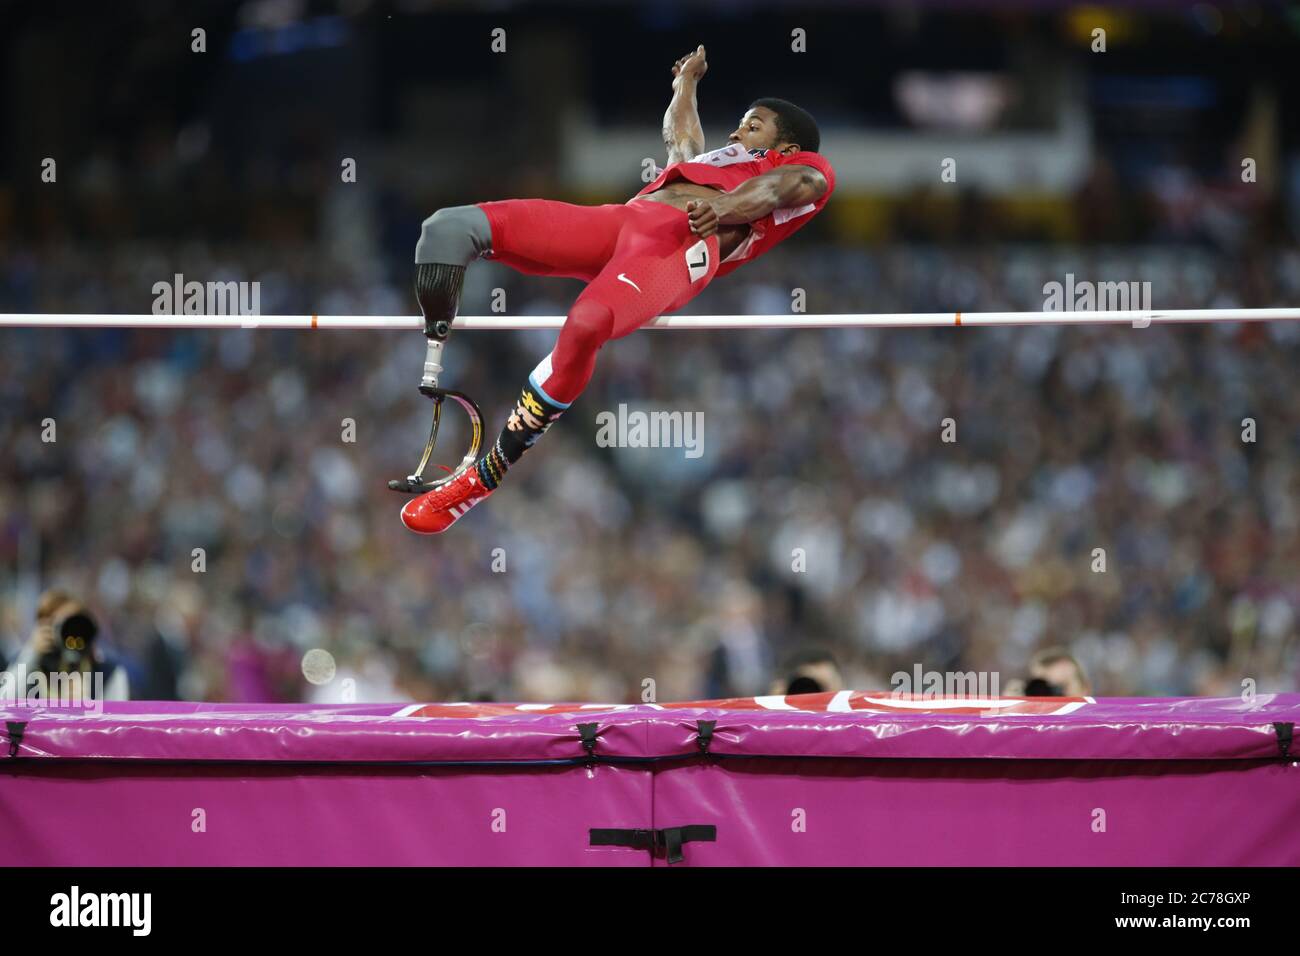 Richard Browne of the United States competes in the Men's High Jump F46 Final during the London 2012 Paralympic Games at the Olympic Stadium in London. 8 September 2012 --- Image by © Paul Cunningham Stock Photo